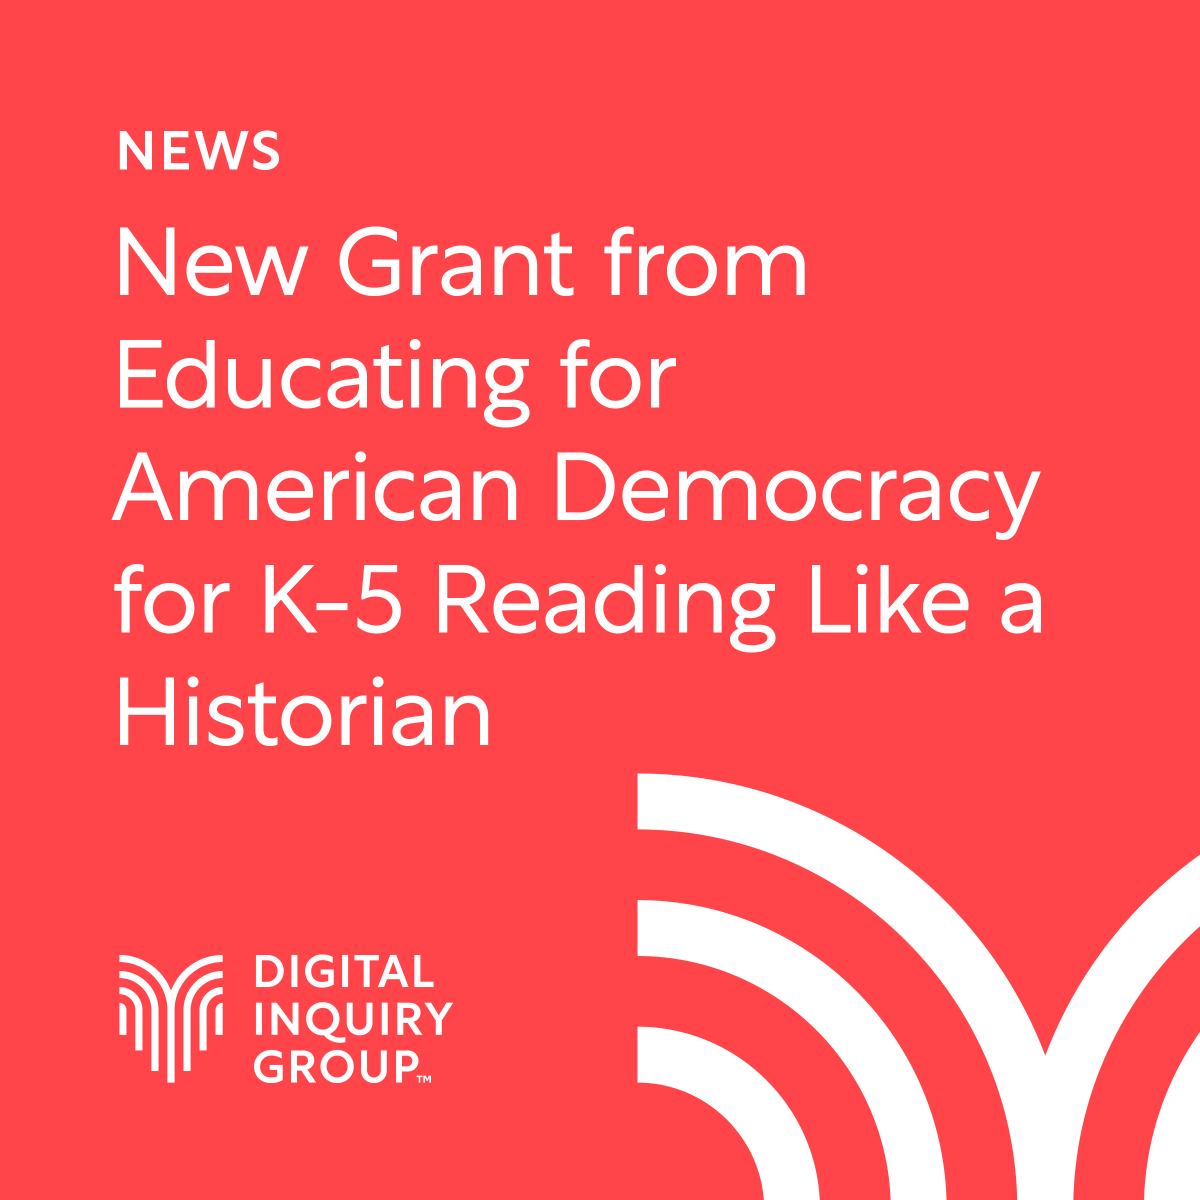 We've partnered with Los Angeles Unified School District to create Reading Like a Historian lessons aligned to the Educating for American Democracy roadmap. Stay tuned for 10 new document-based history lessons for elementary classrooms. inquirygroup.org/projects